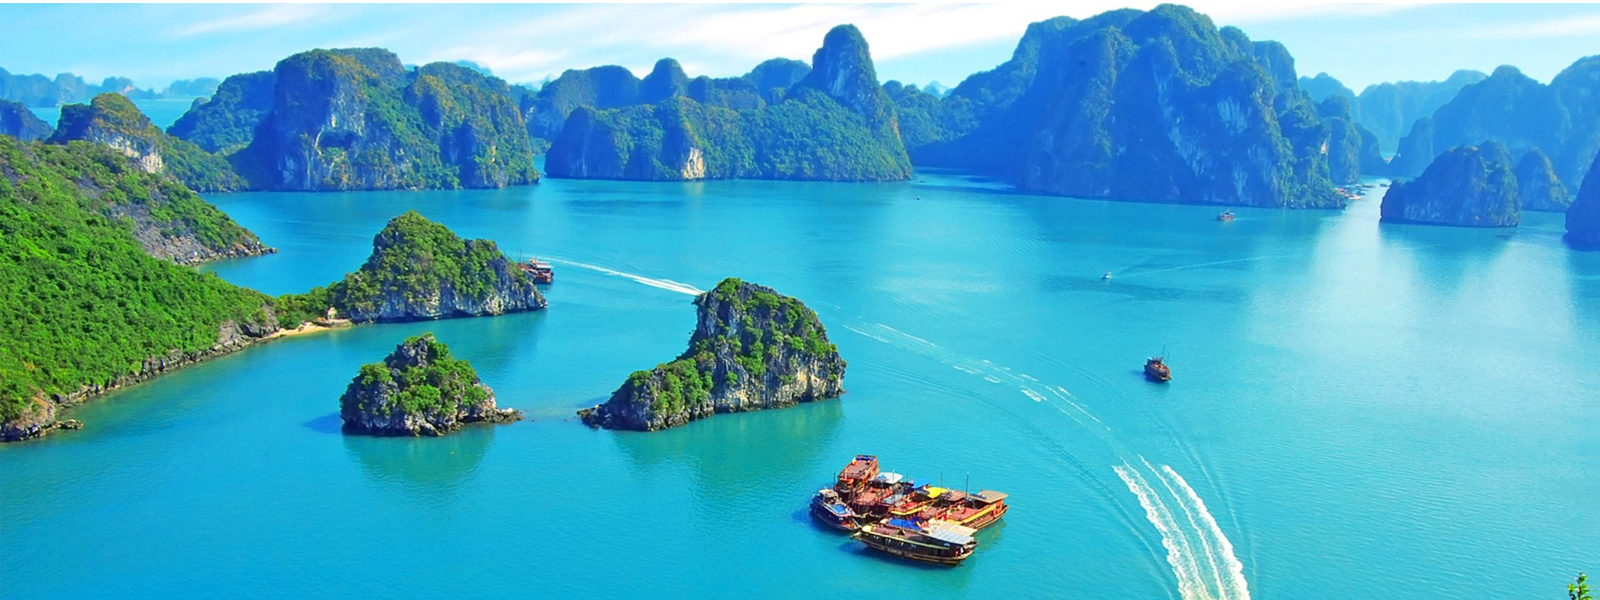 TRAVEL TO VIETNAM, ALL YOU NEED TO KNOW